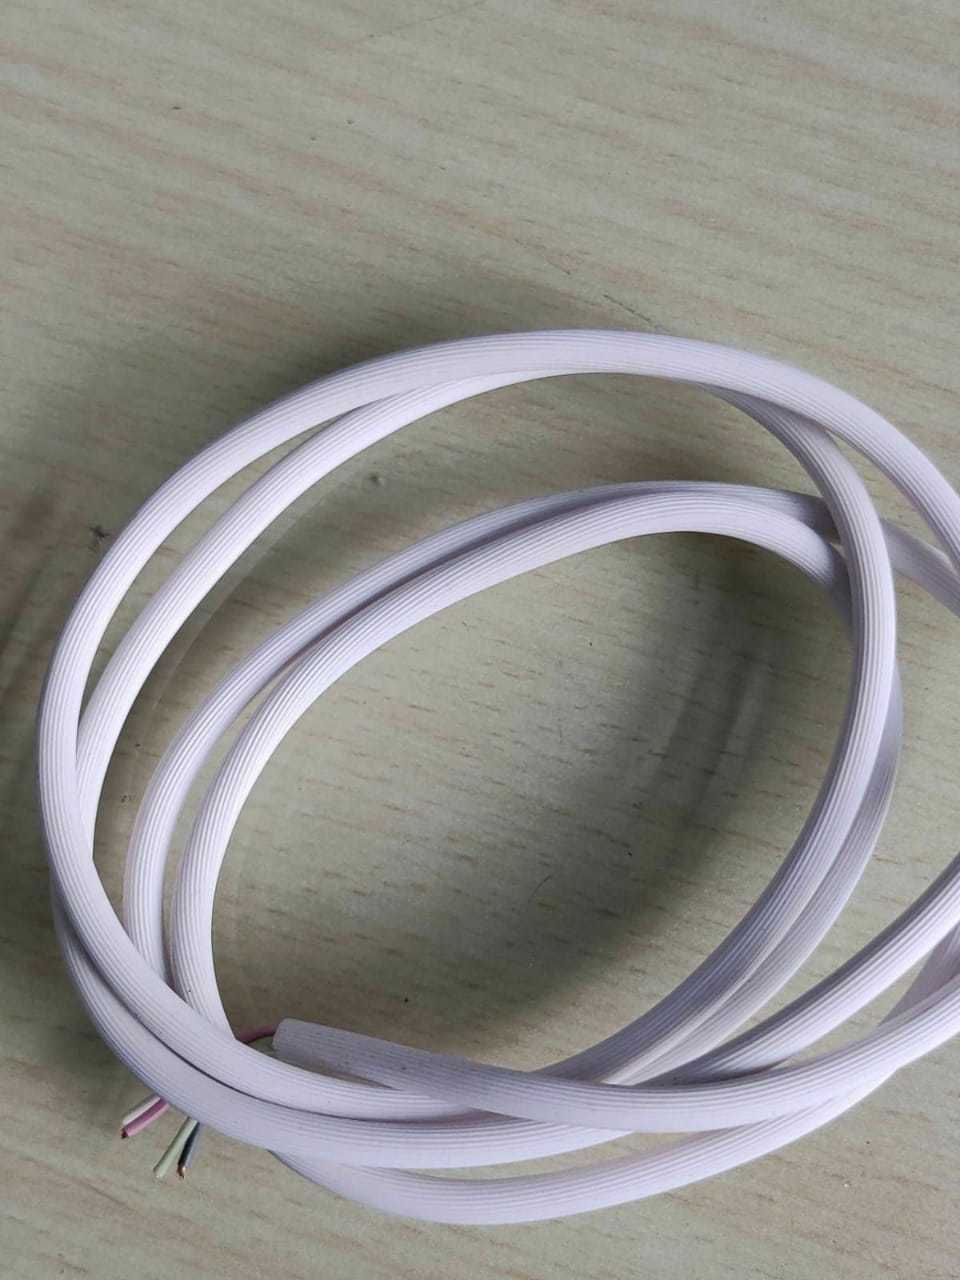 4 CORE DATA CABLE WIRE (LINNING)